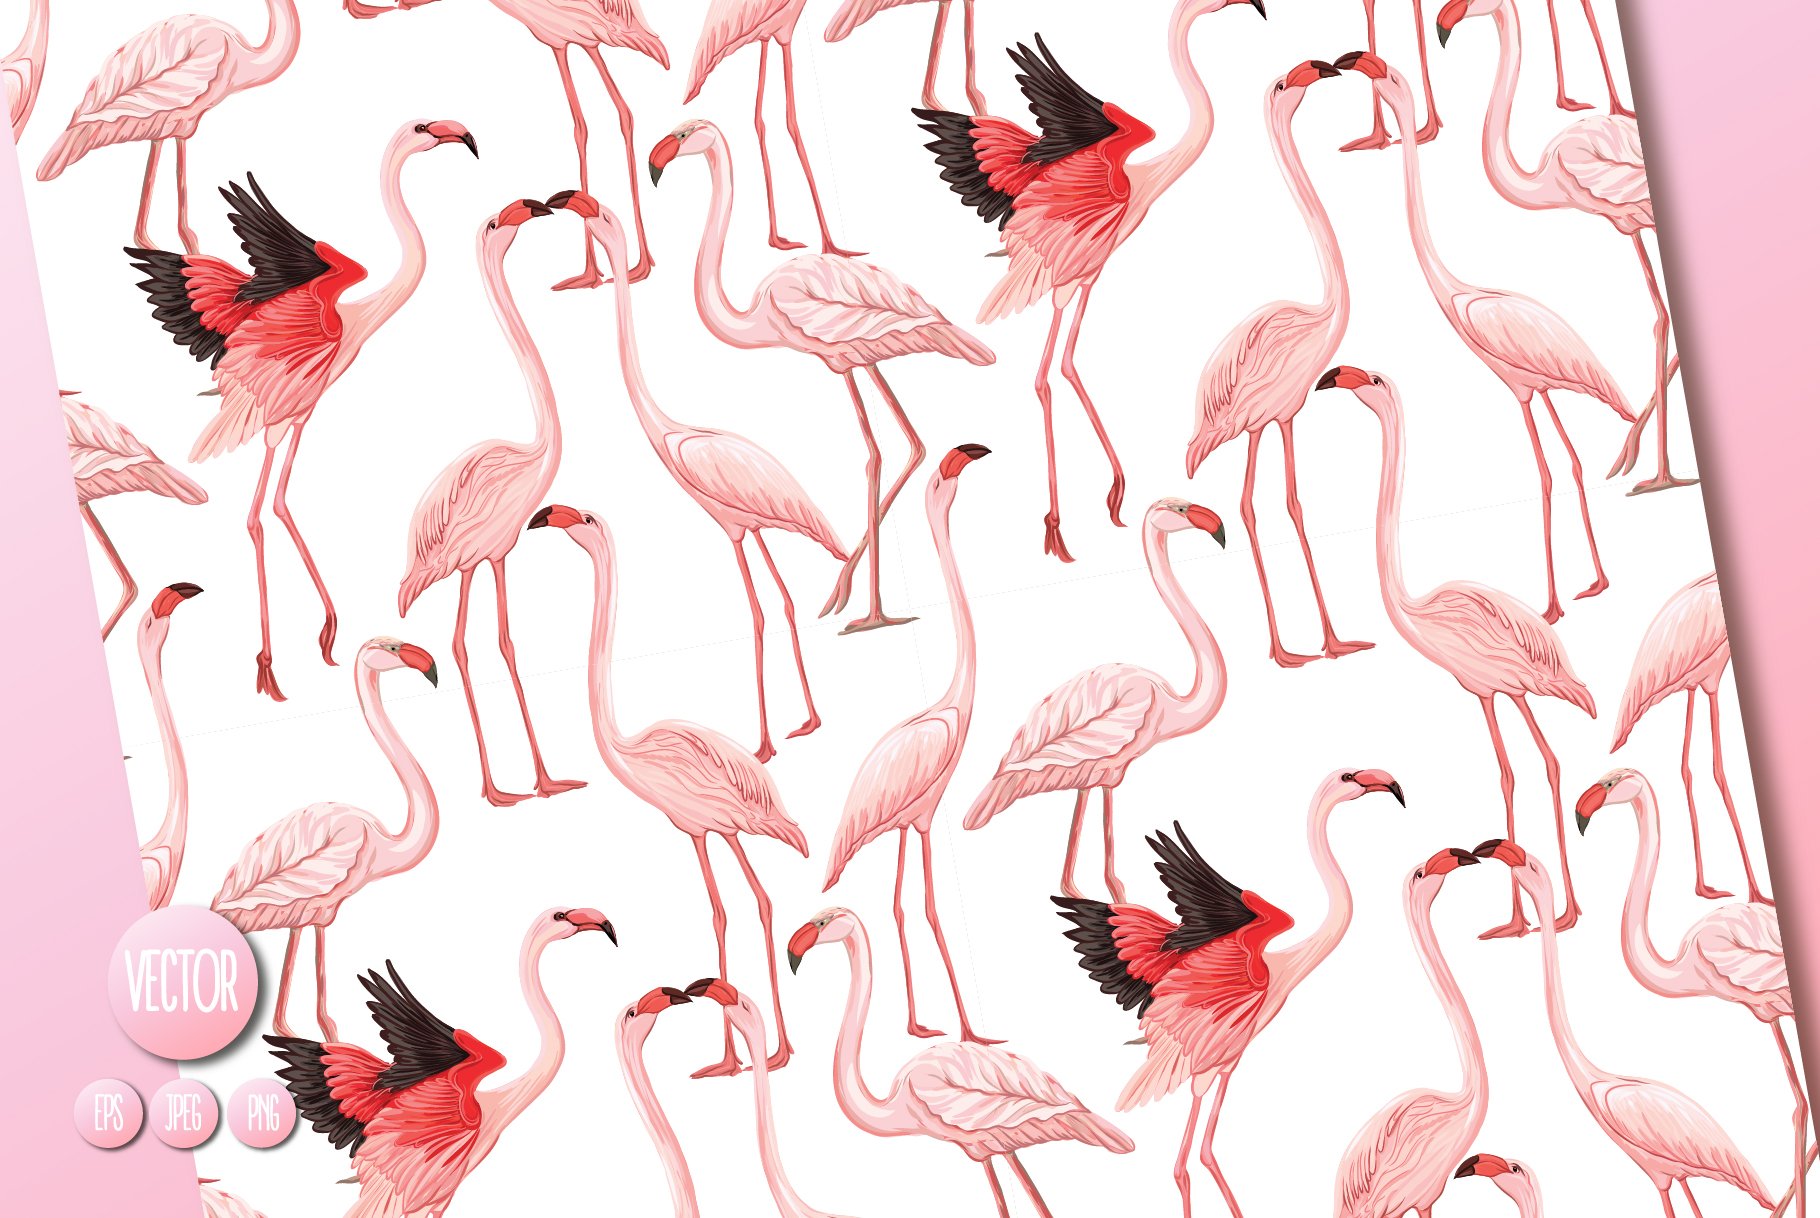 Flamingo for the stylish clothes.